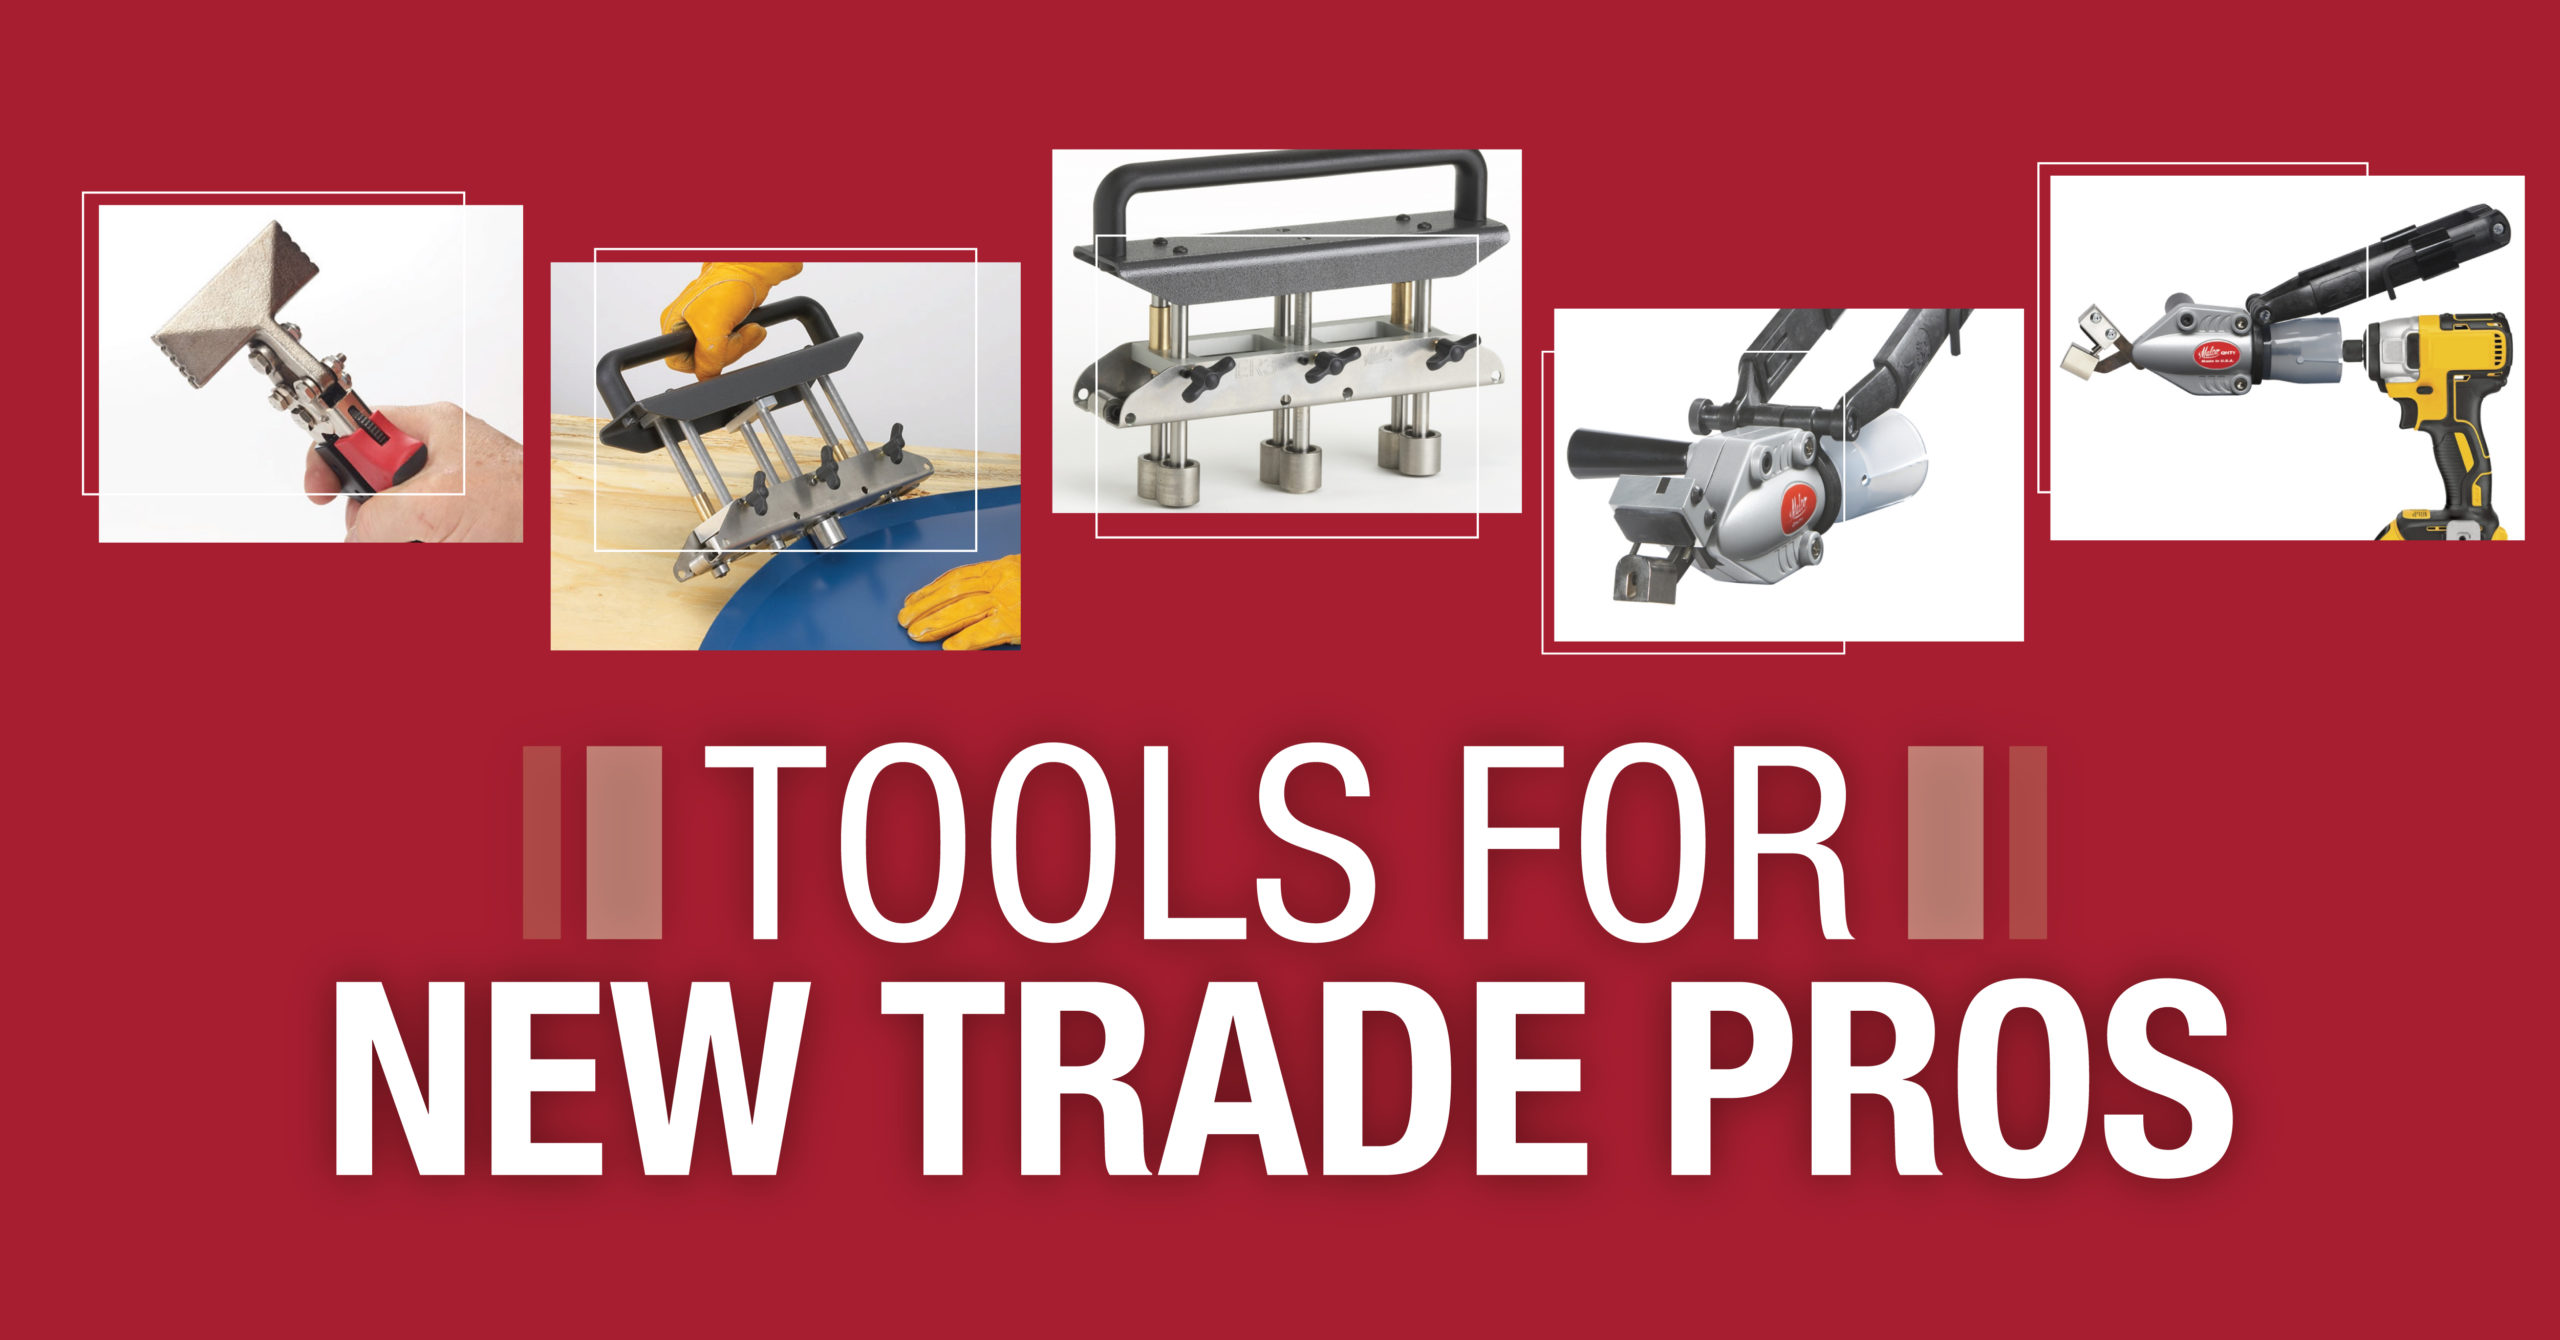 Tools for new trade pros with five images of hand tools 